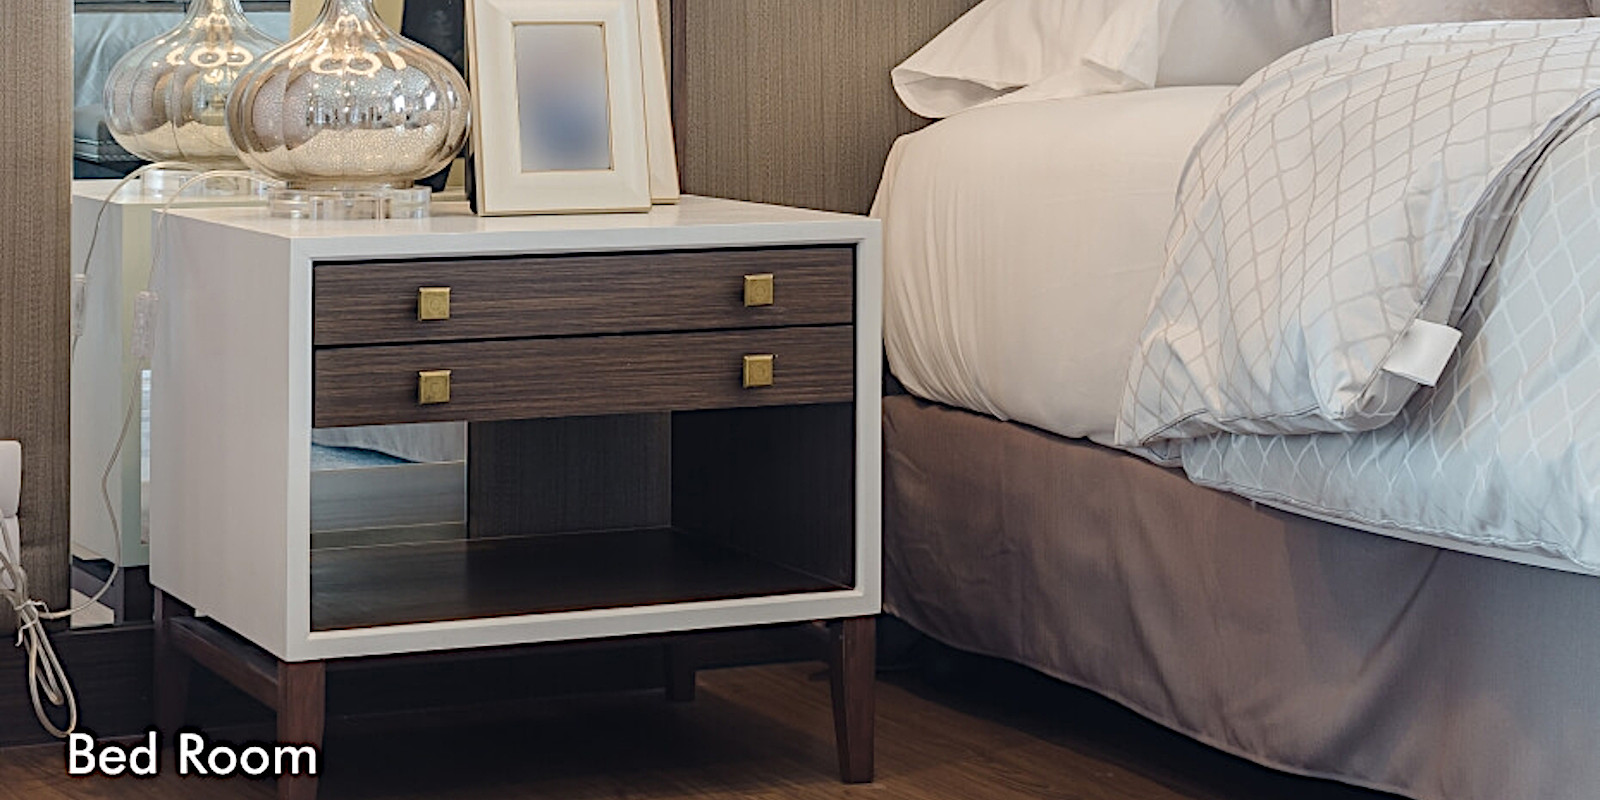 Bedroom furniture popularly priced